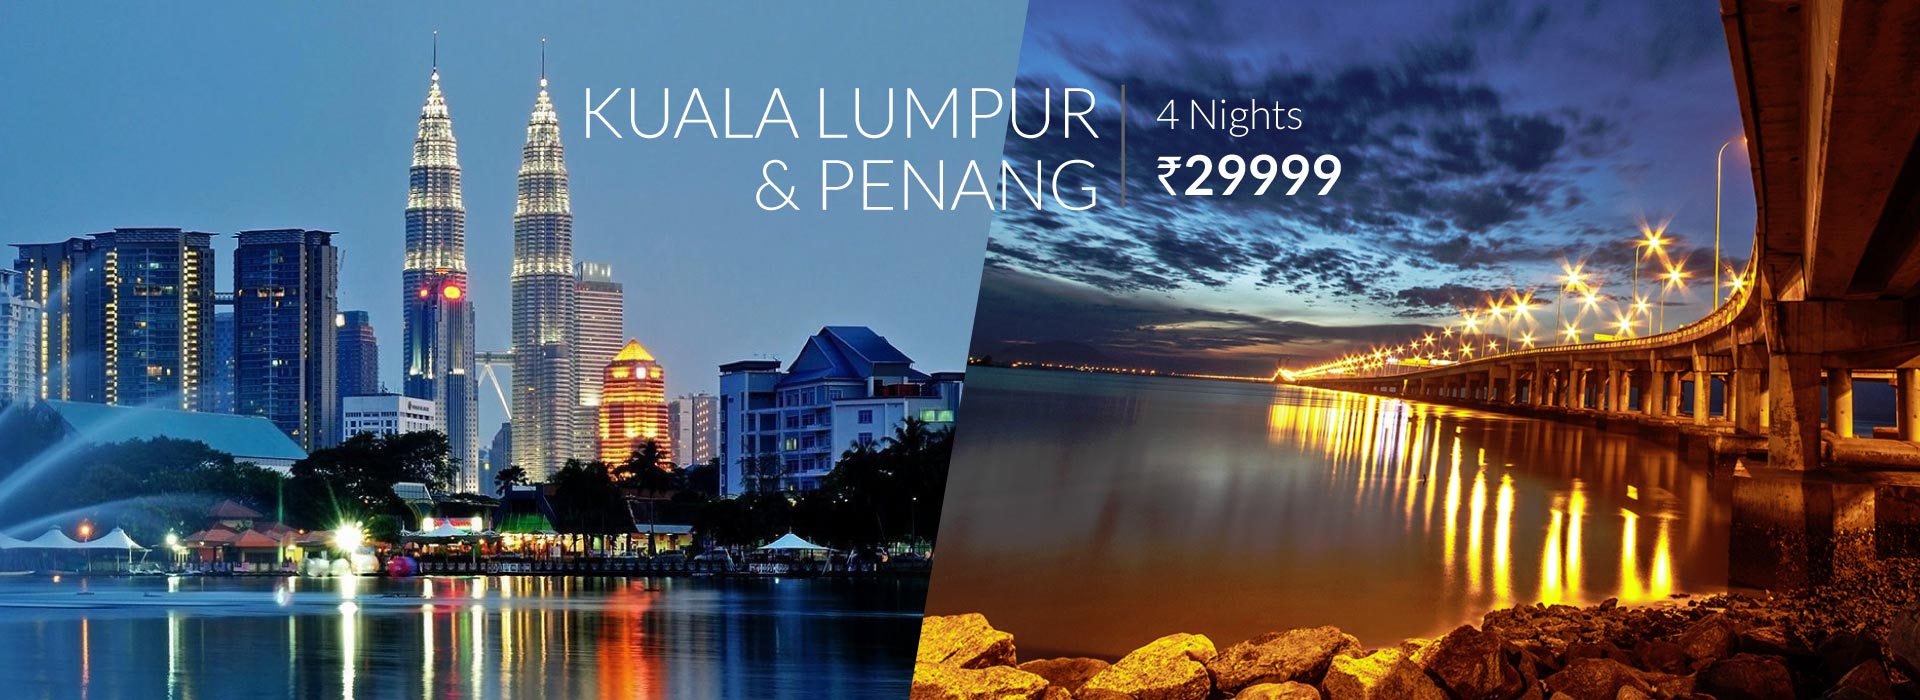 Kuala Lumpur Penang Holiday Deal Packages At Best Price On Dpauls Com